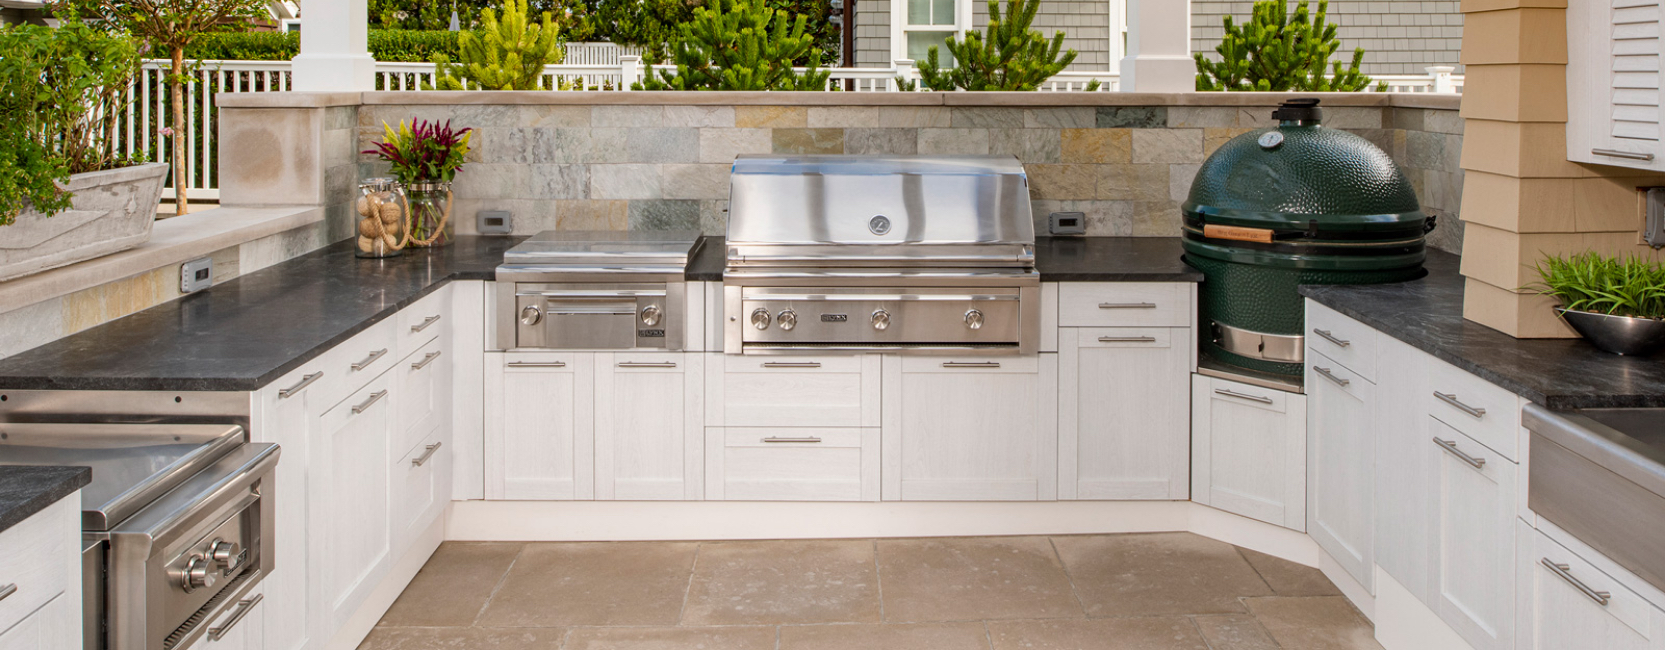 Outdoor Kitchen Ada Requirements For